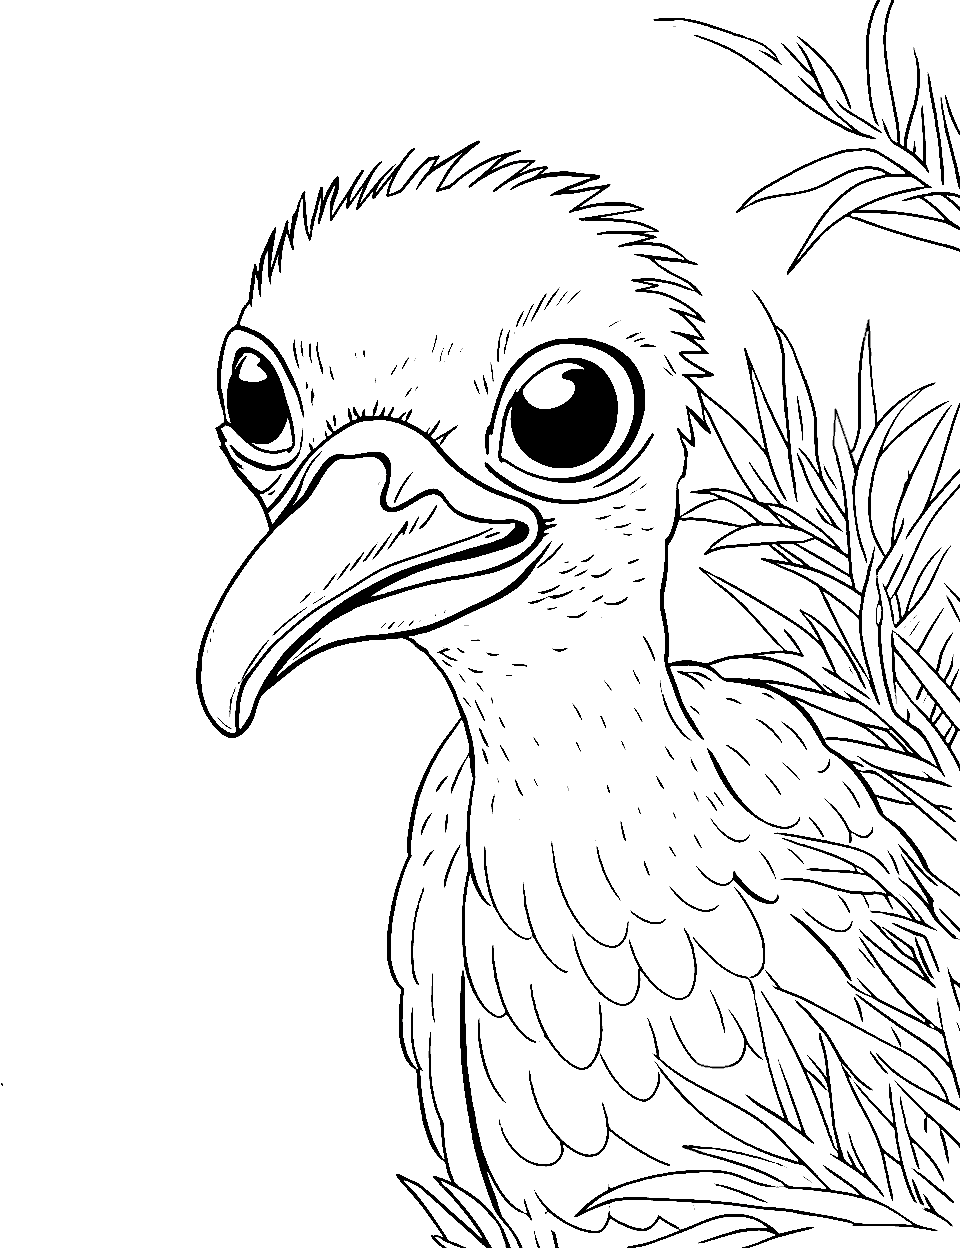 Ostrich's Playful Peek Coloring Page - An ostrich peeking out from behind a bush.